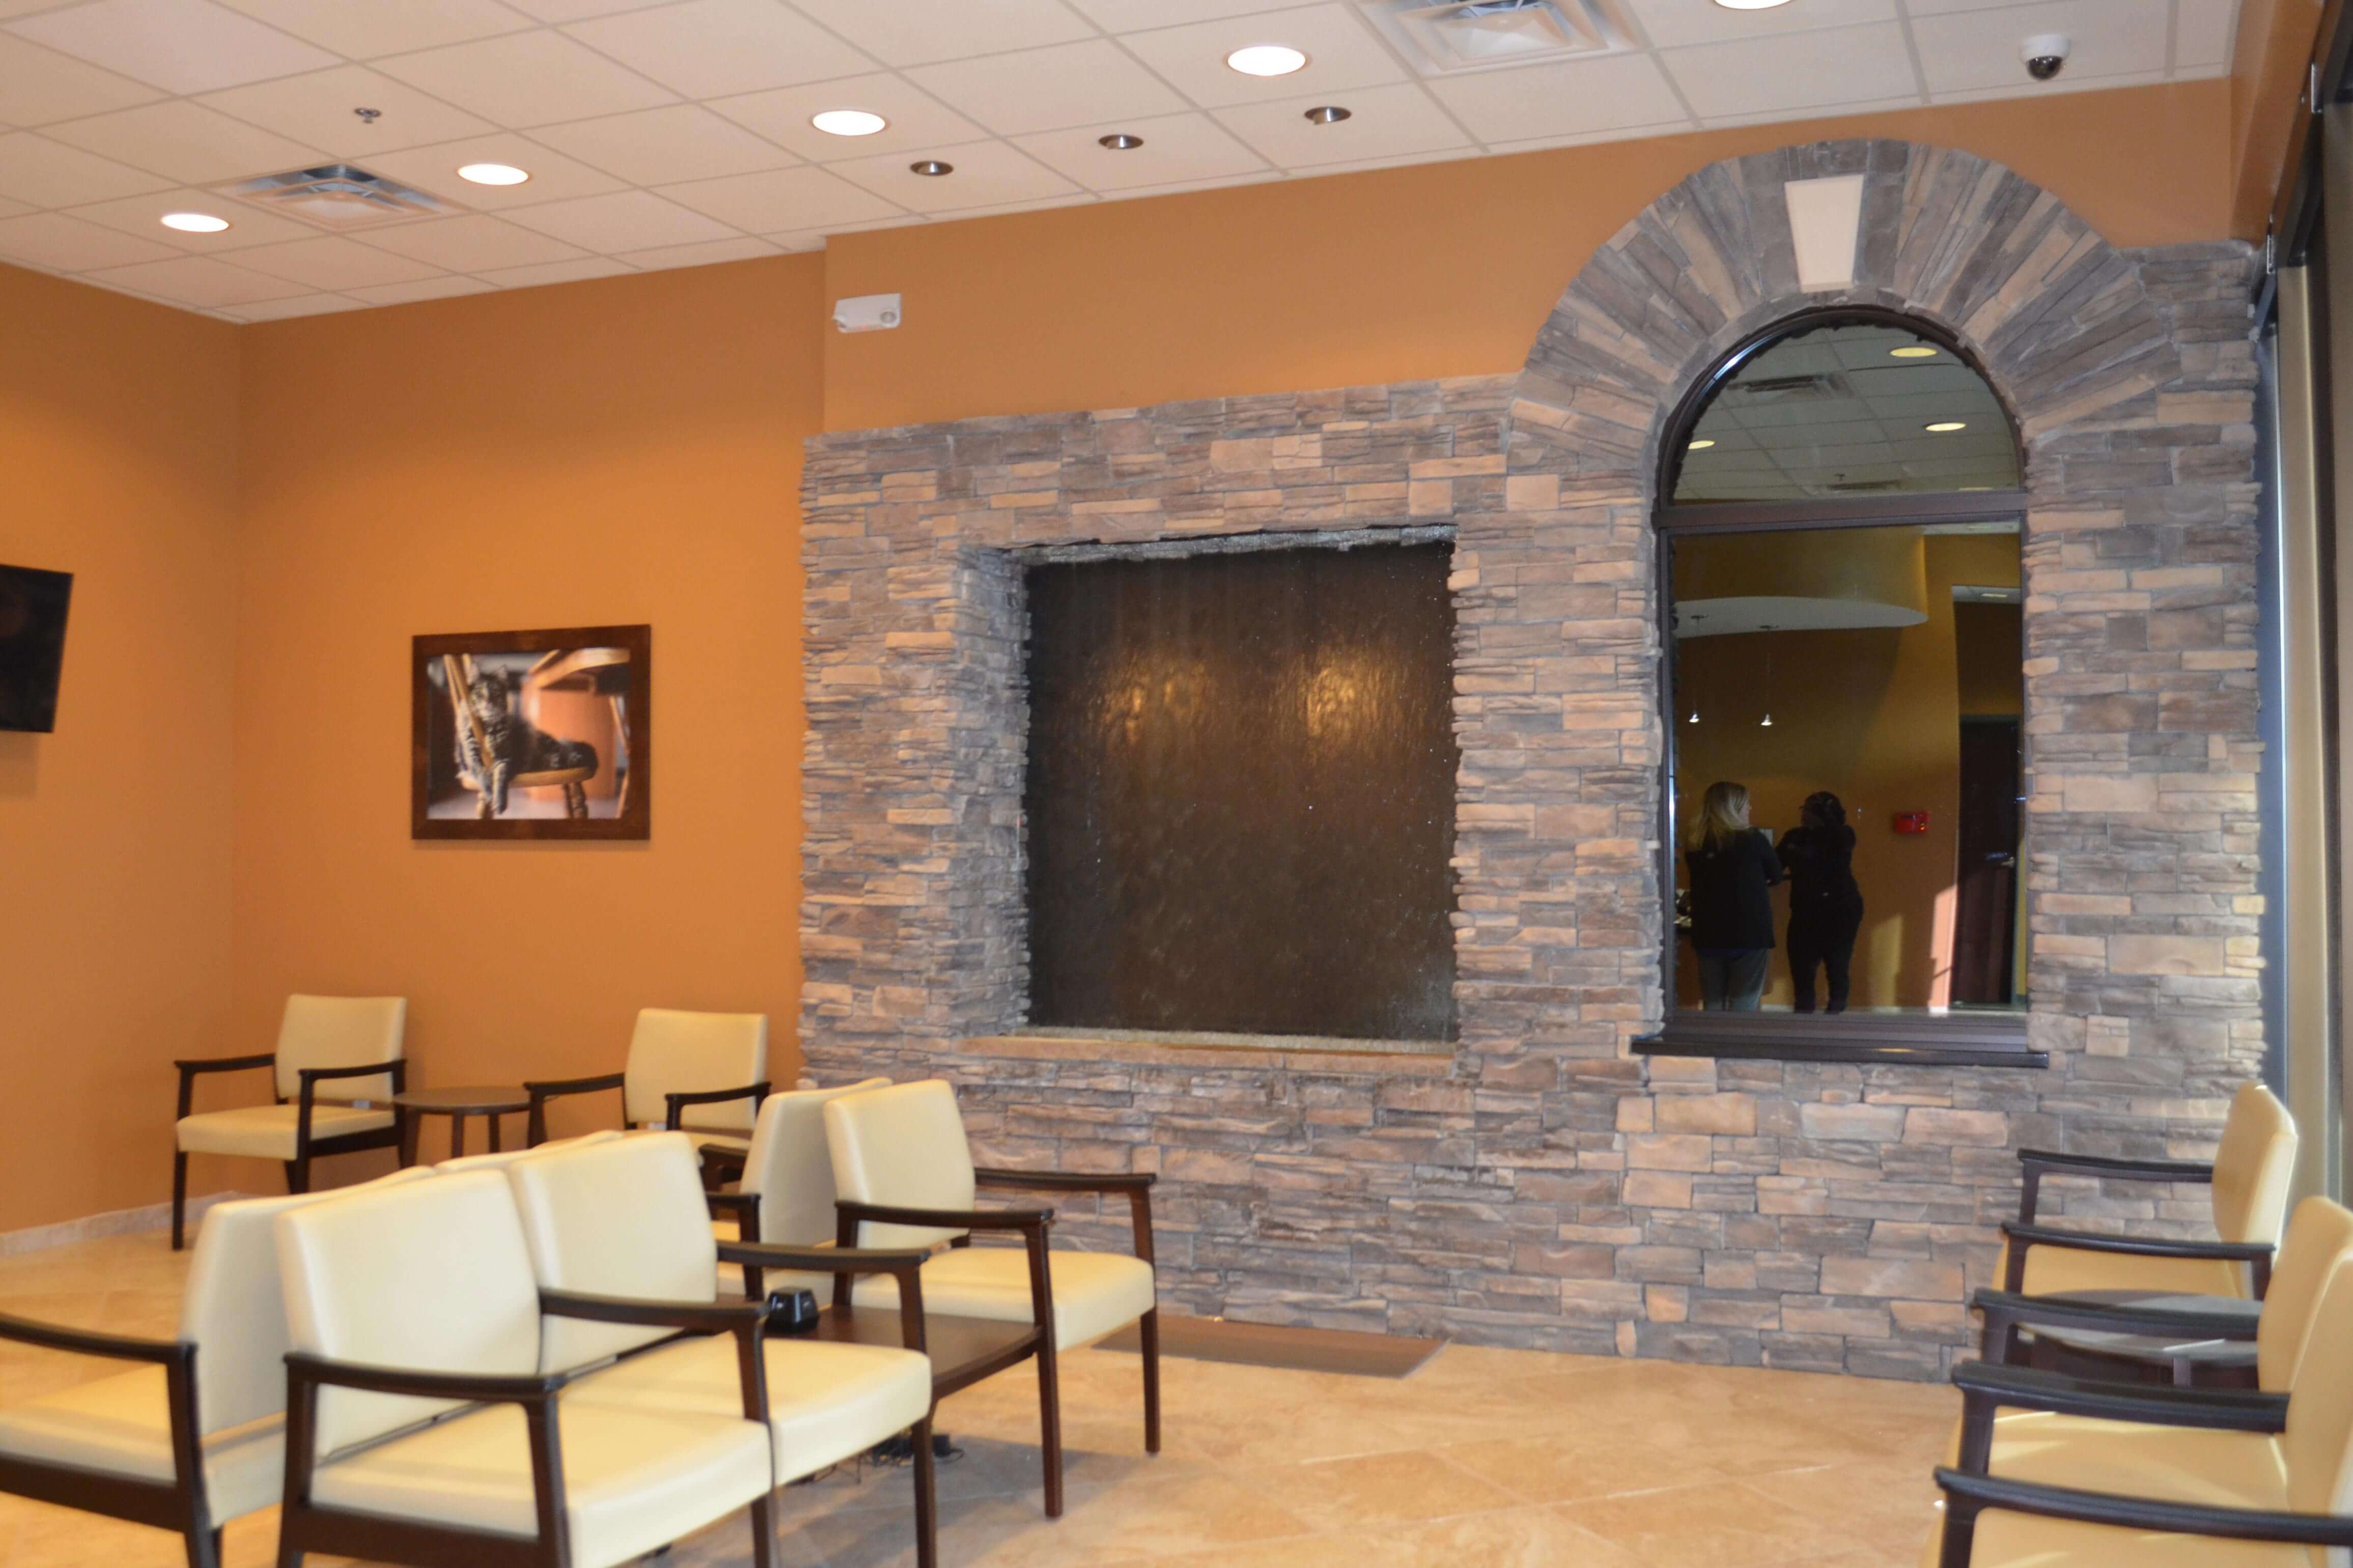 Lobby wall has warm tones with a large stonework window display. Seating in front.